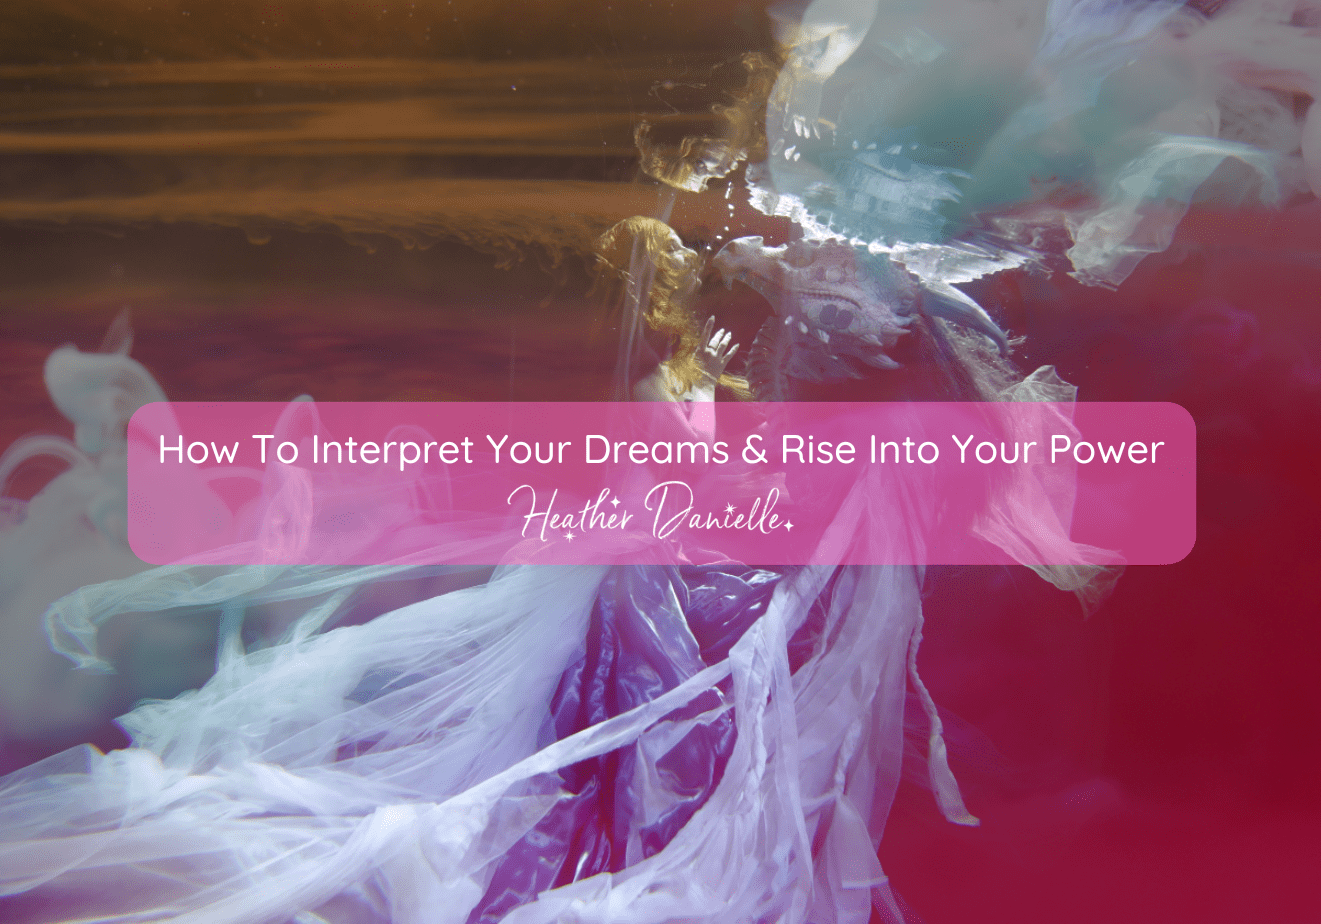 Copy of how to interpret your dreams and rise into your power (3)